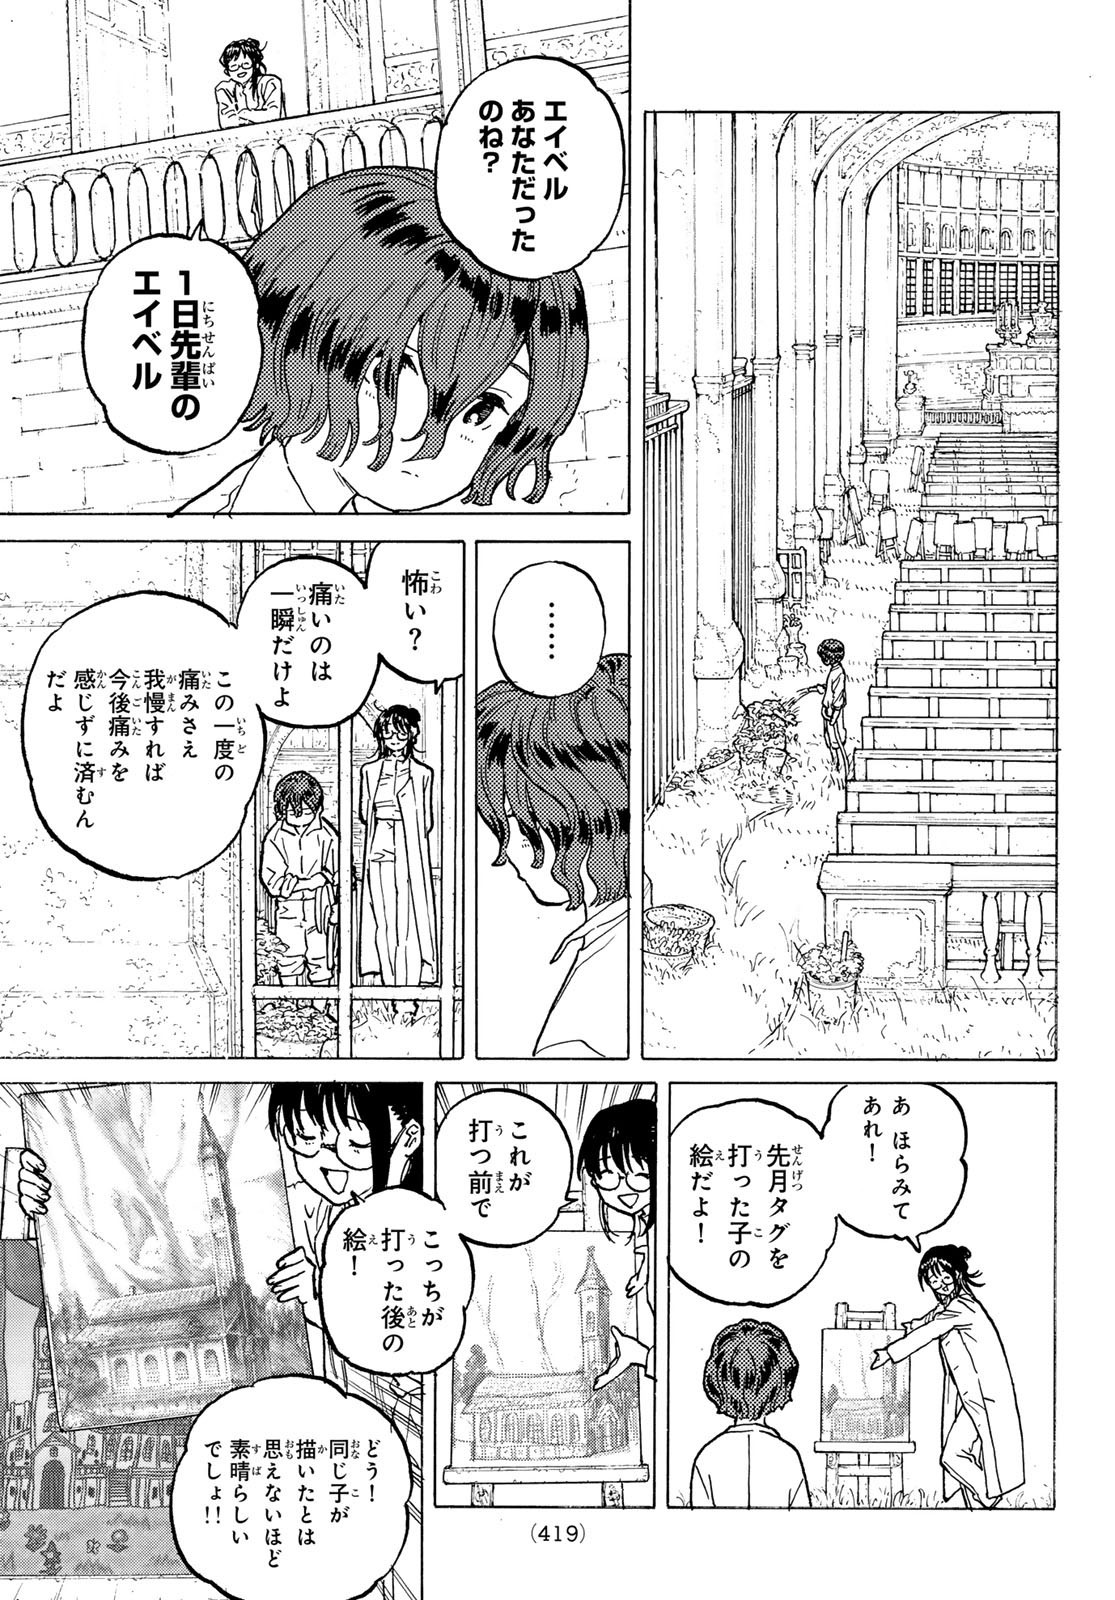 Weekly Shōnen Magazine - 週刊少年マガジン - Chapter 2024-27 - Page 417